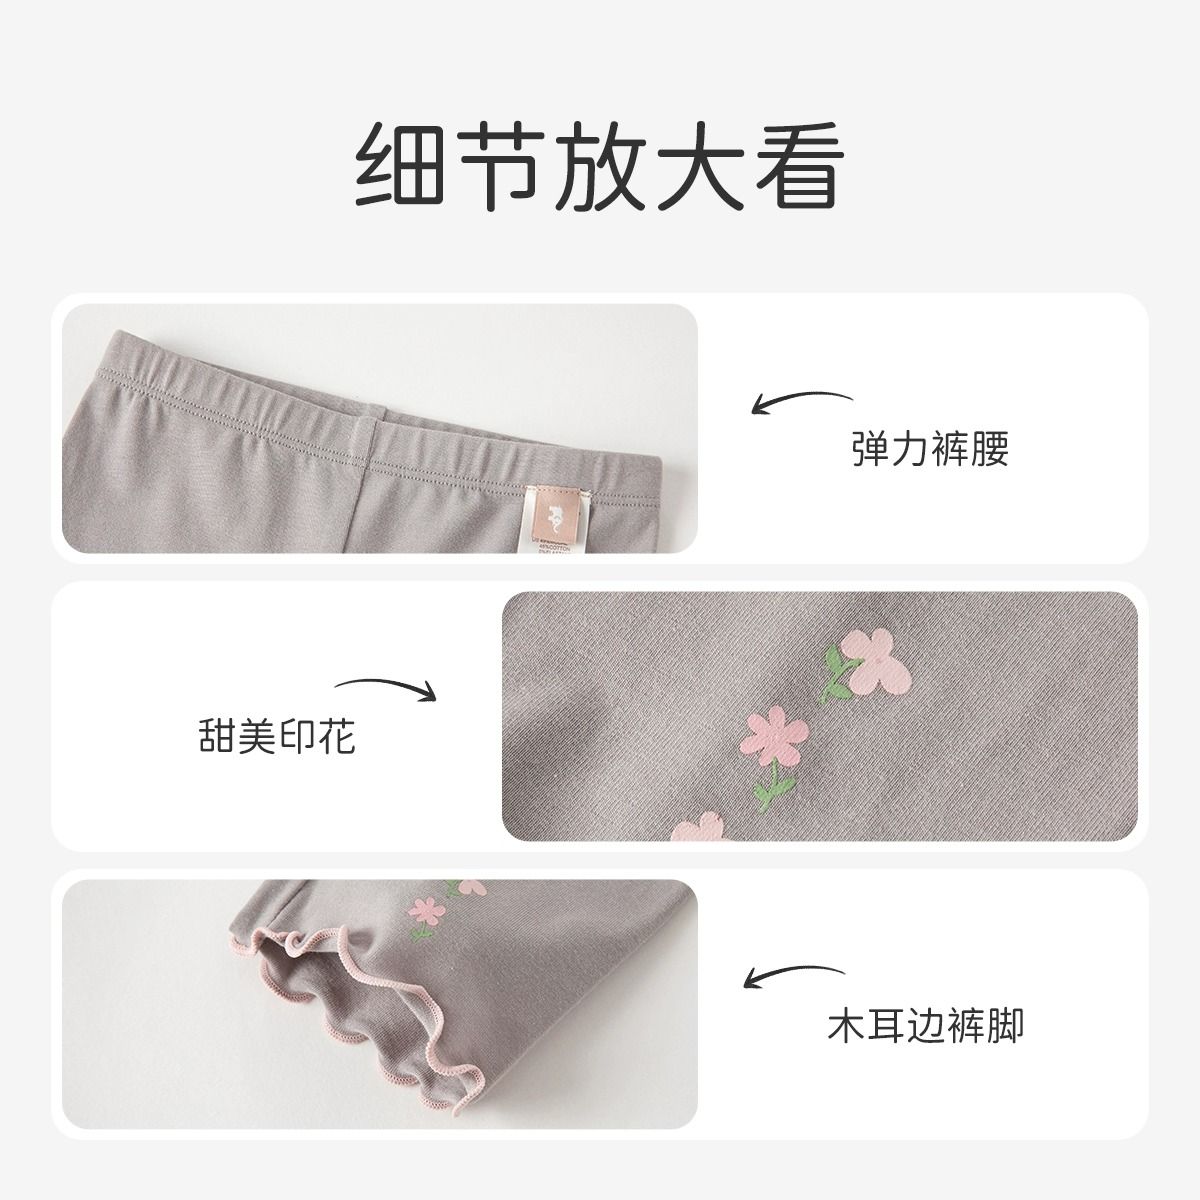 Girls' leggings, summer thin children's modal cropped pants shorts, baby and middle-aged children's fashionable pants for outer wear